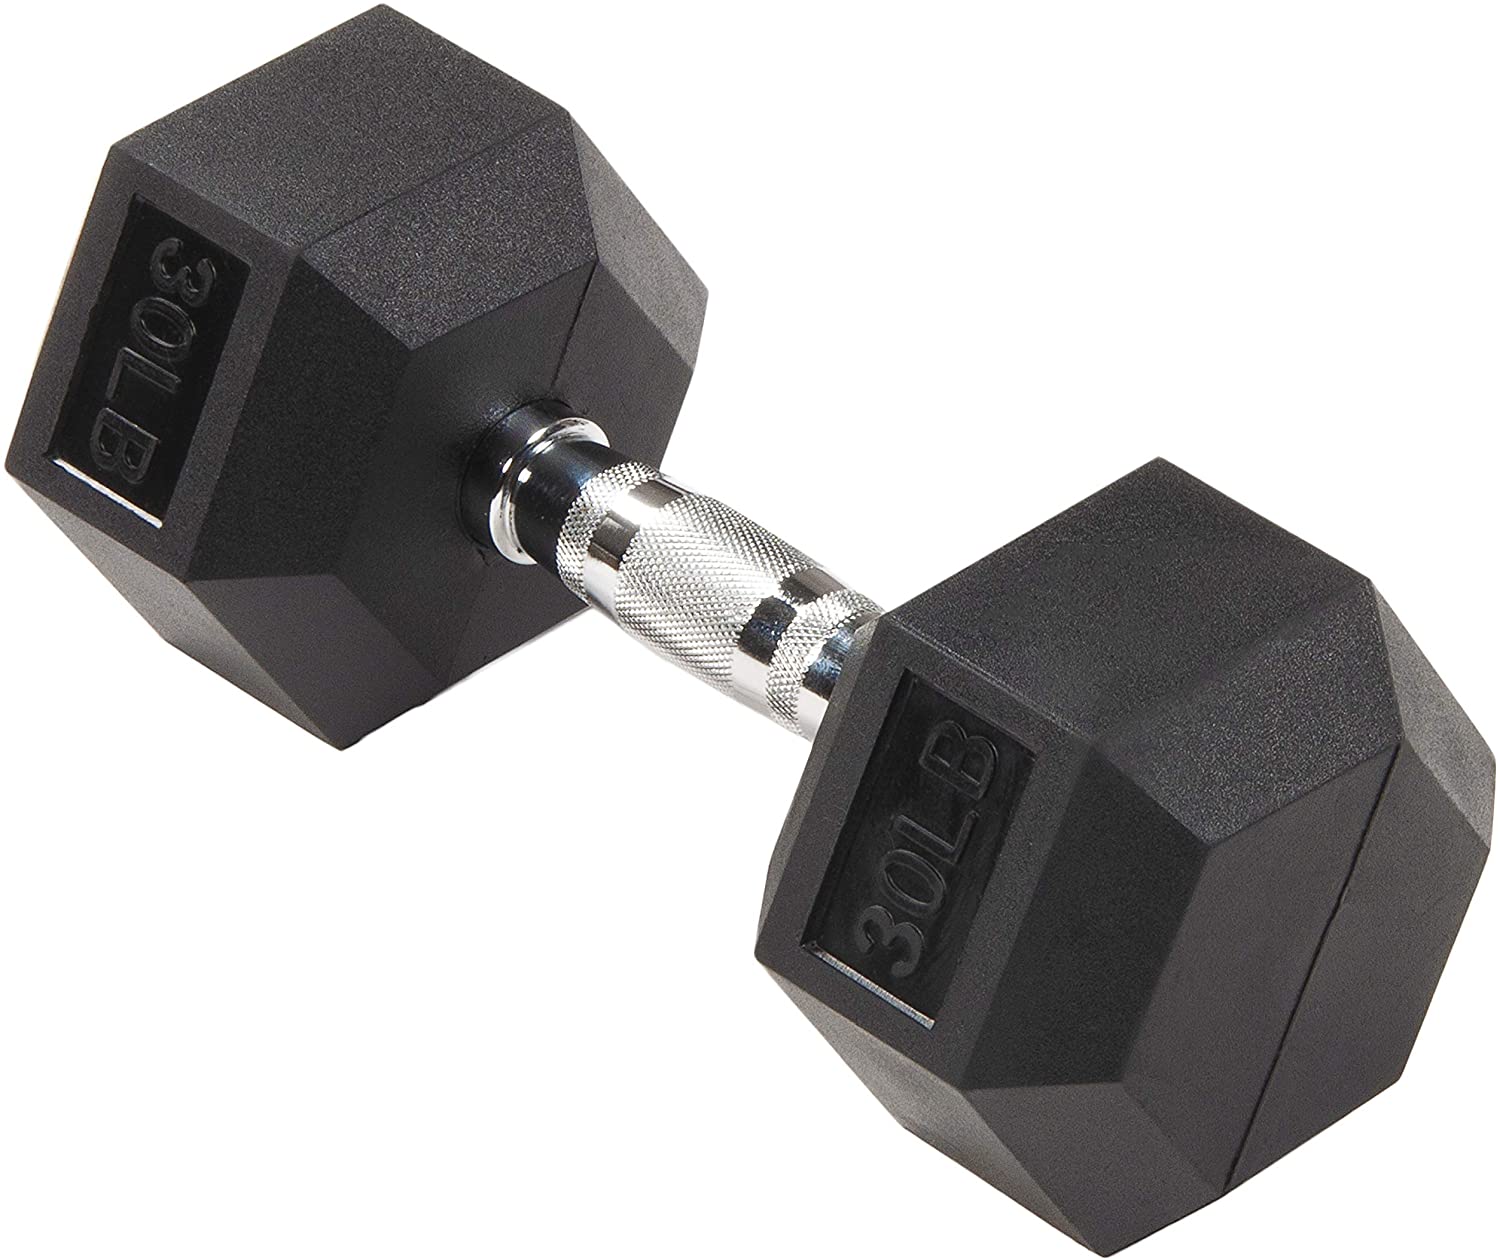 Gym; Home Gym; Garage Gym; Exercise; Exercise Equipment; Fitness; Strength & Conditioning; Strength Training; Dumbbells; Hex Dumbells